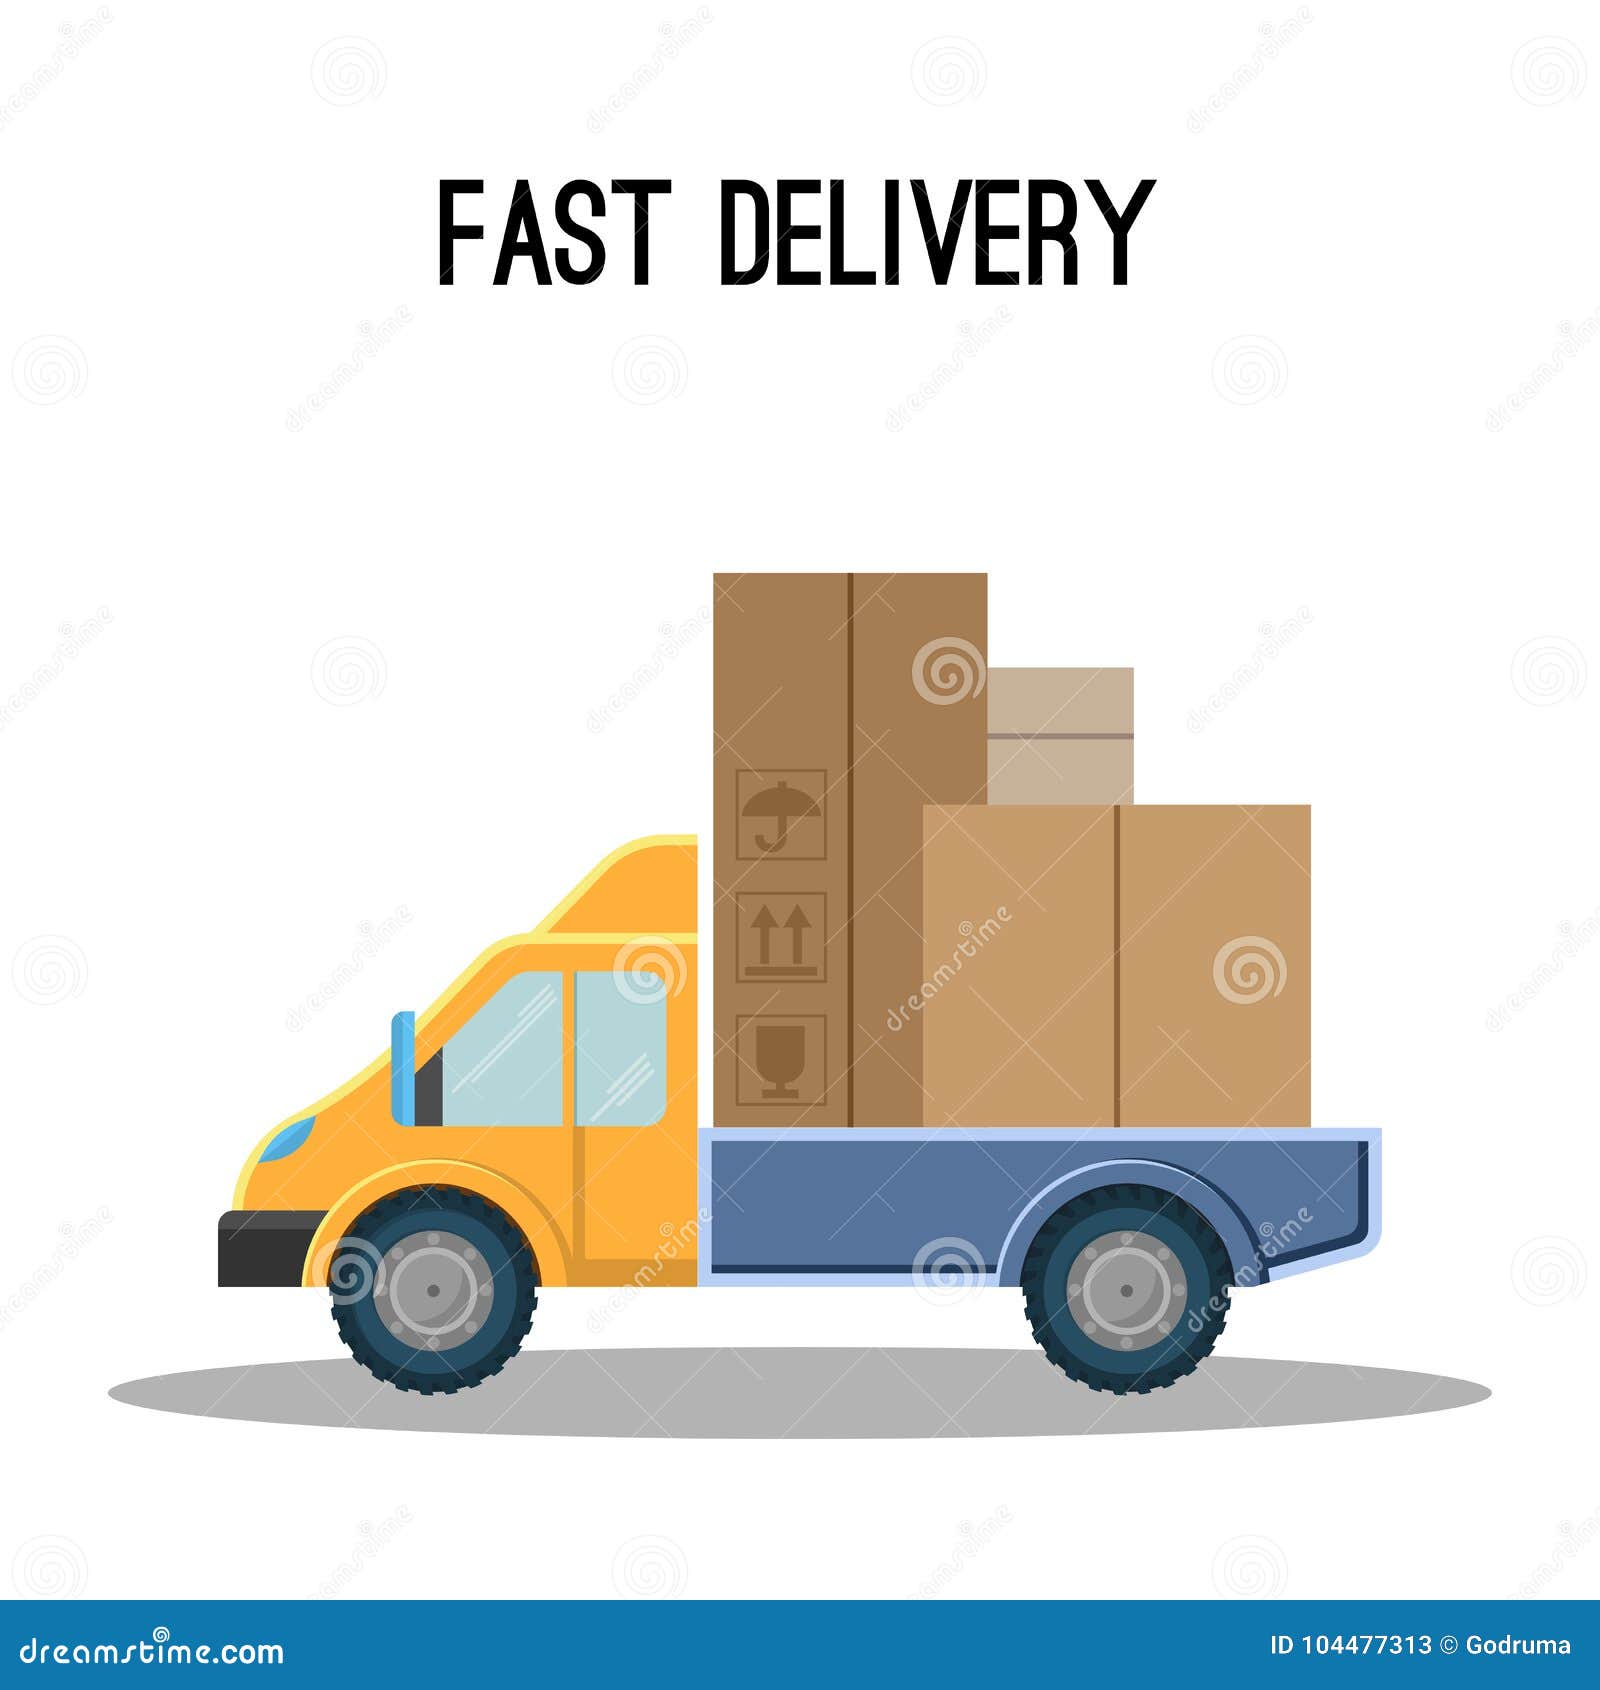 Fast Delivery Poster with Truck Full of Cardboard Boxes Stock Vector ...